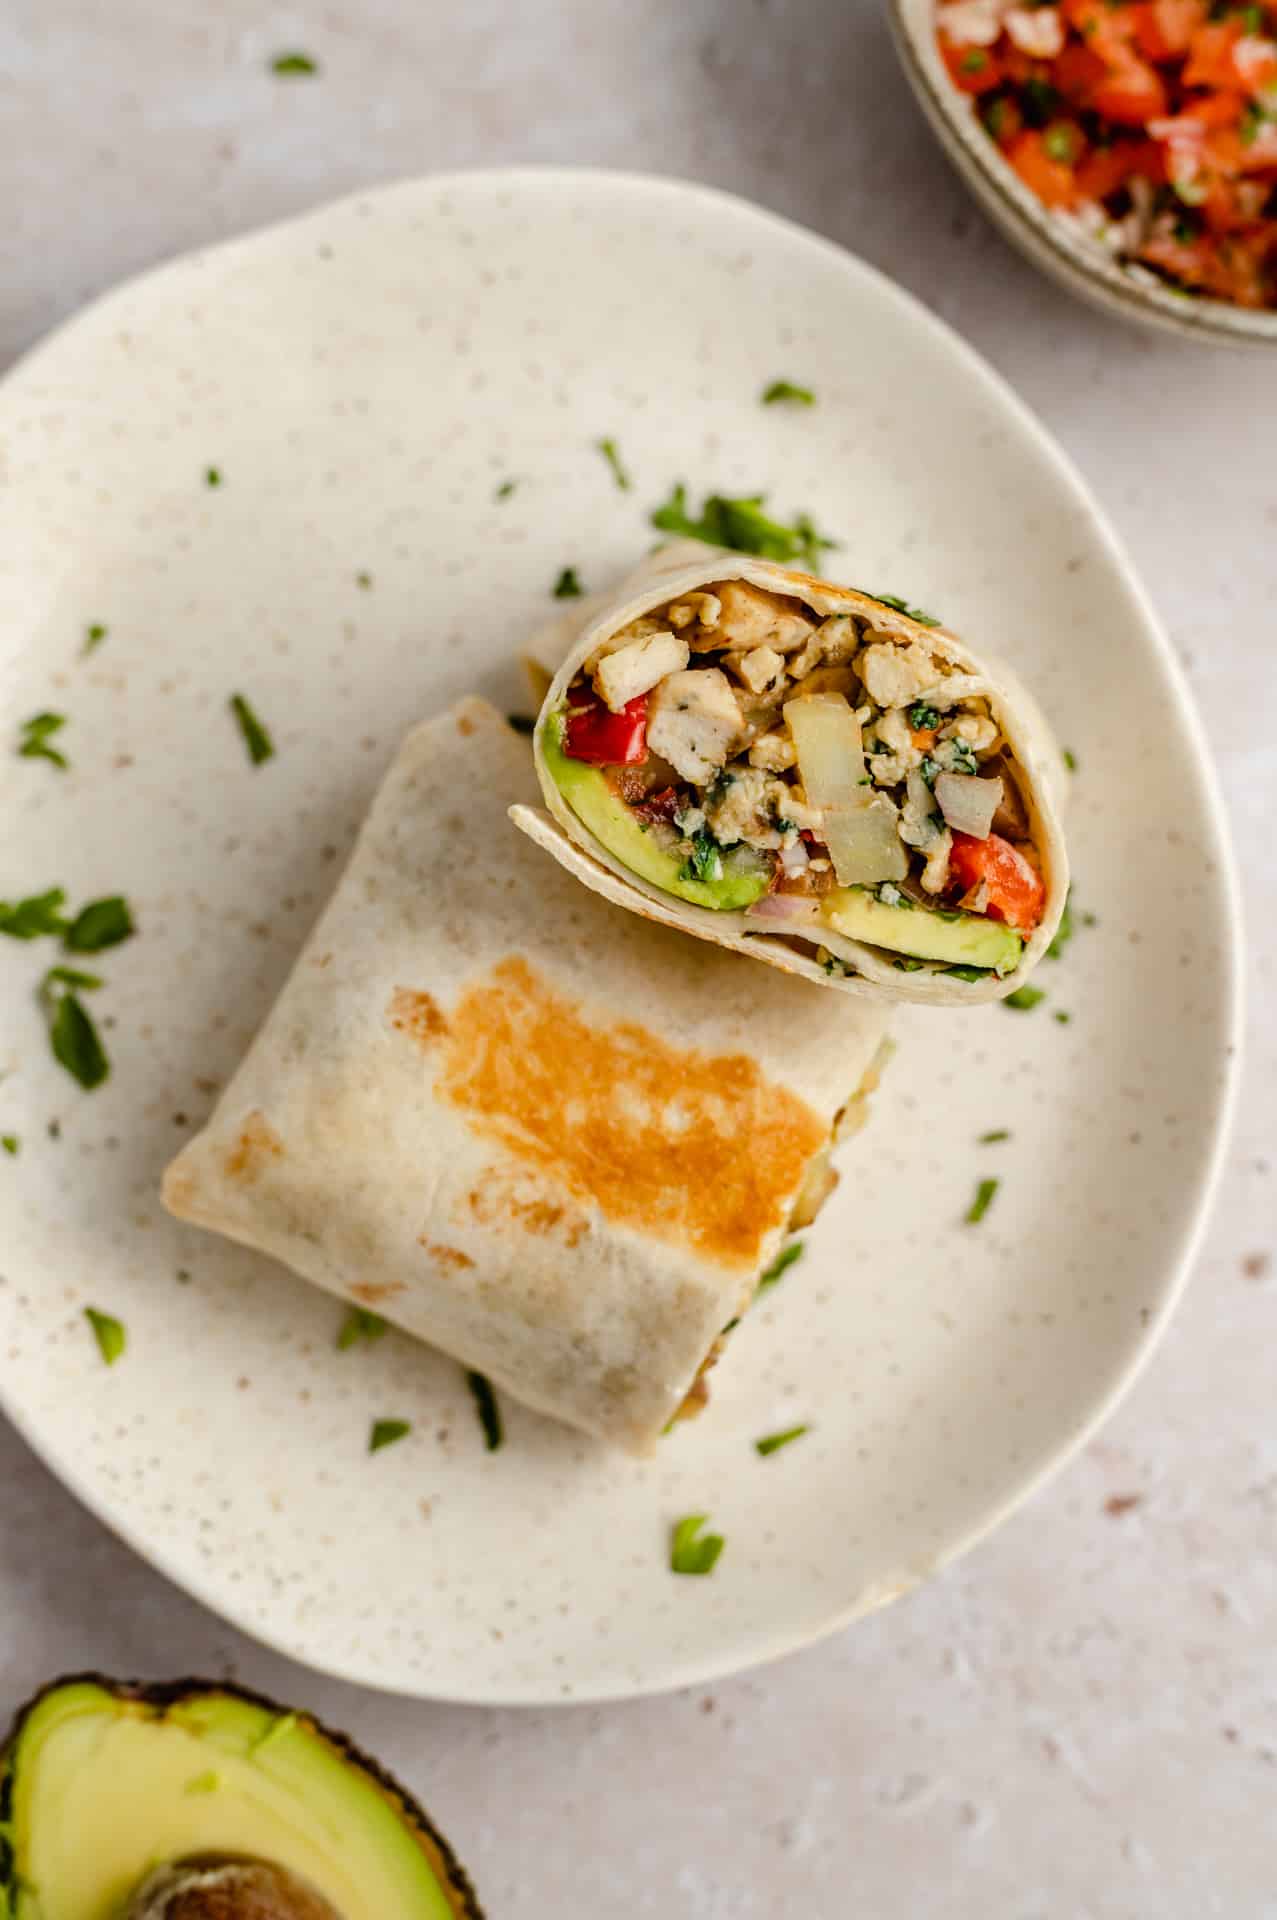 25 Healthy Chicken Wrap Recipes For Lunch or Dinner - Insanely Good